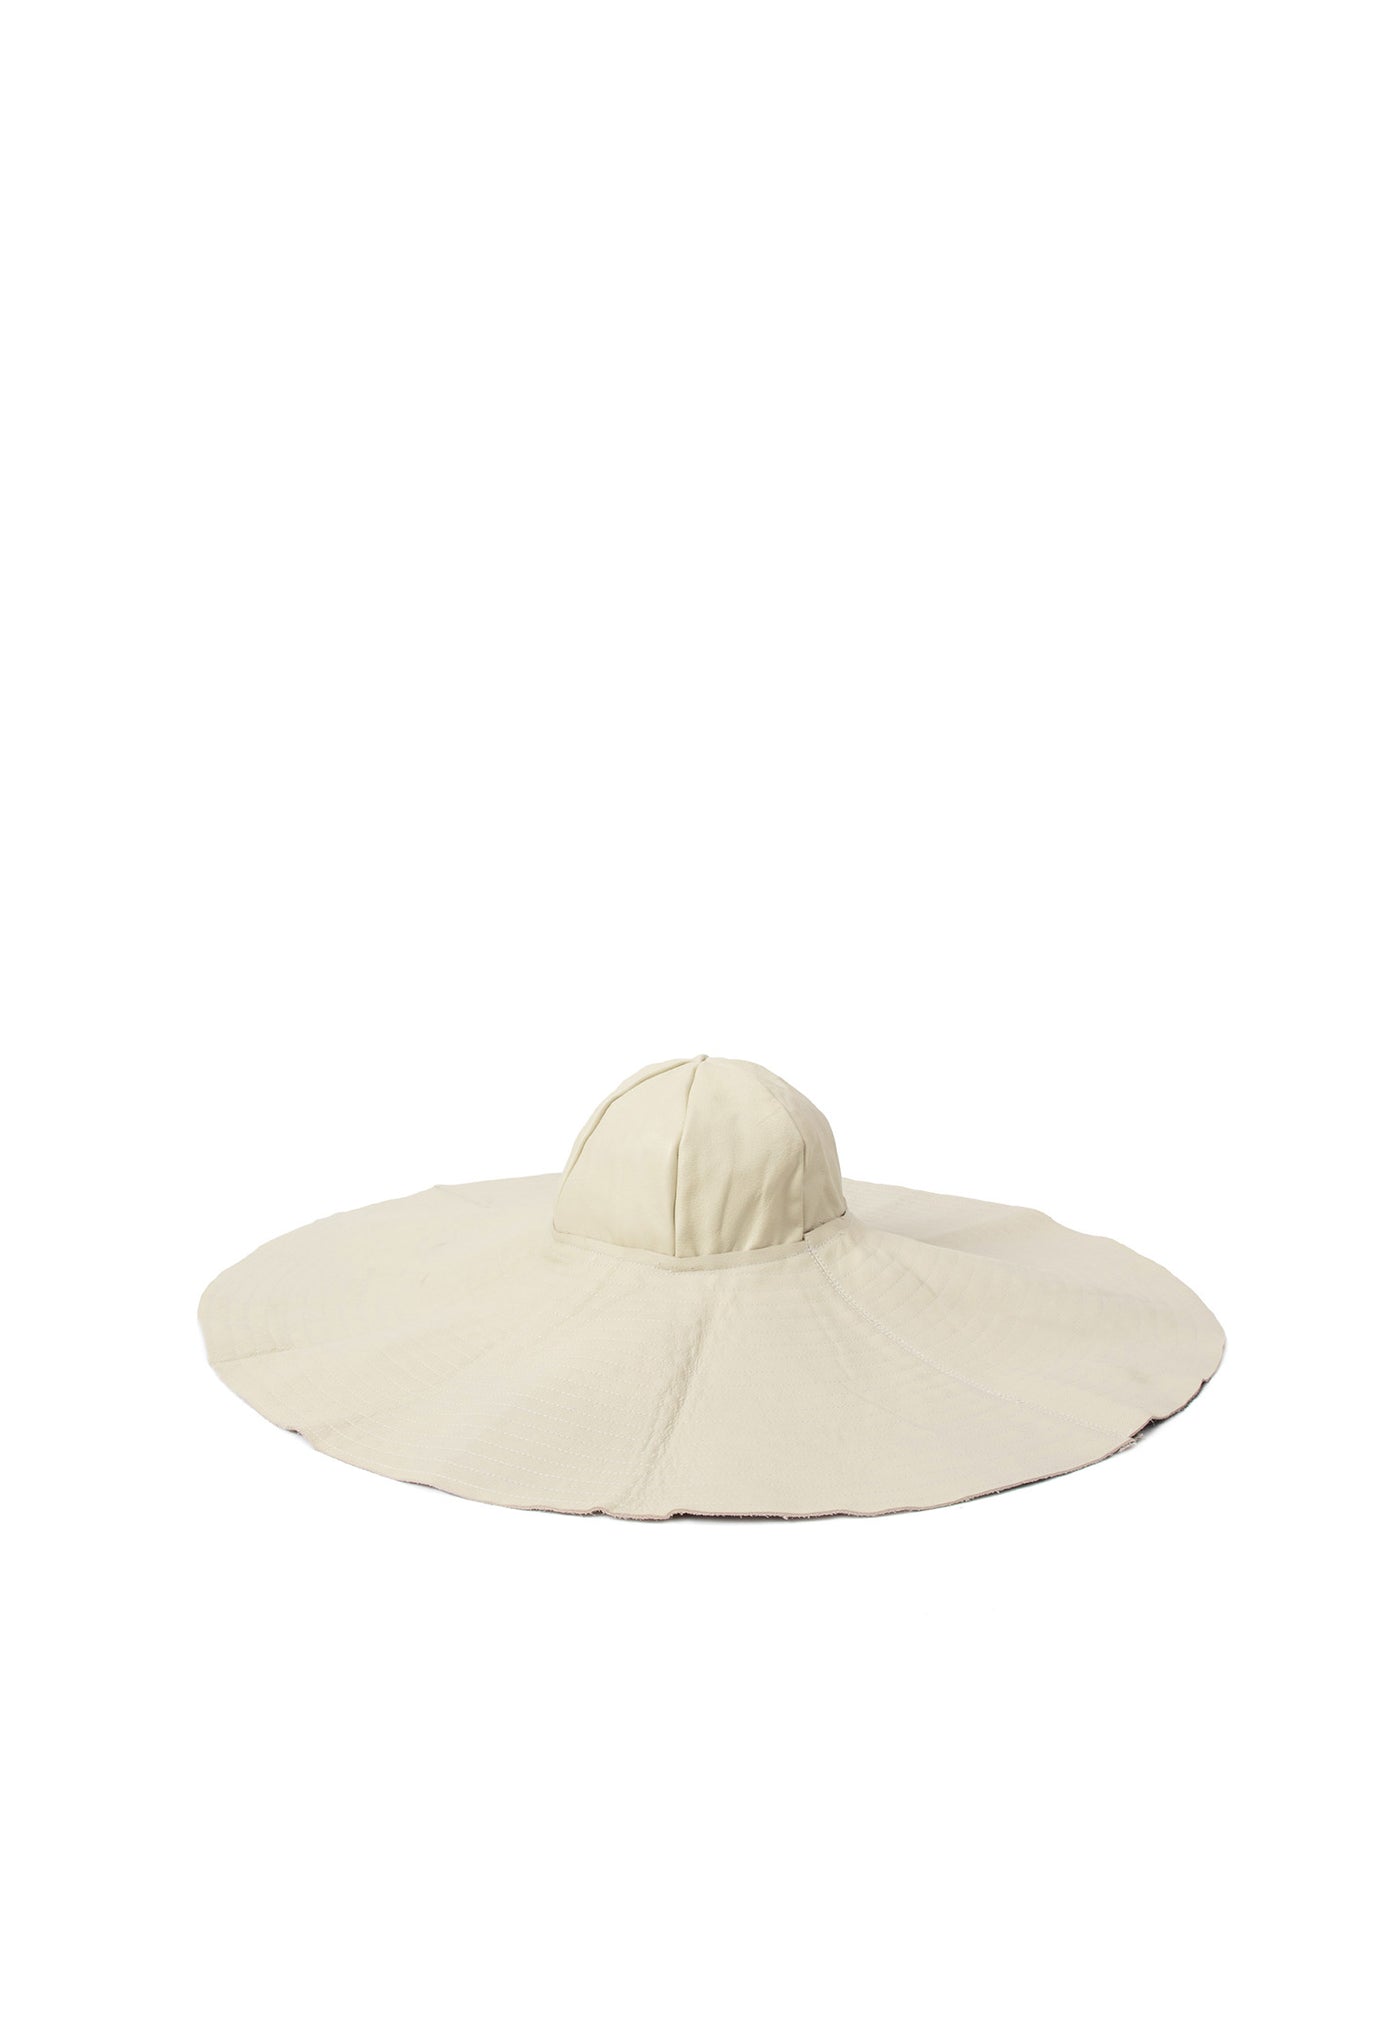 FIELD DAY LEATHER SUNHAT